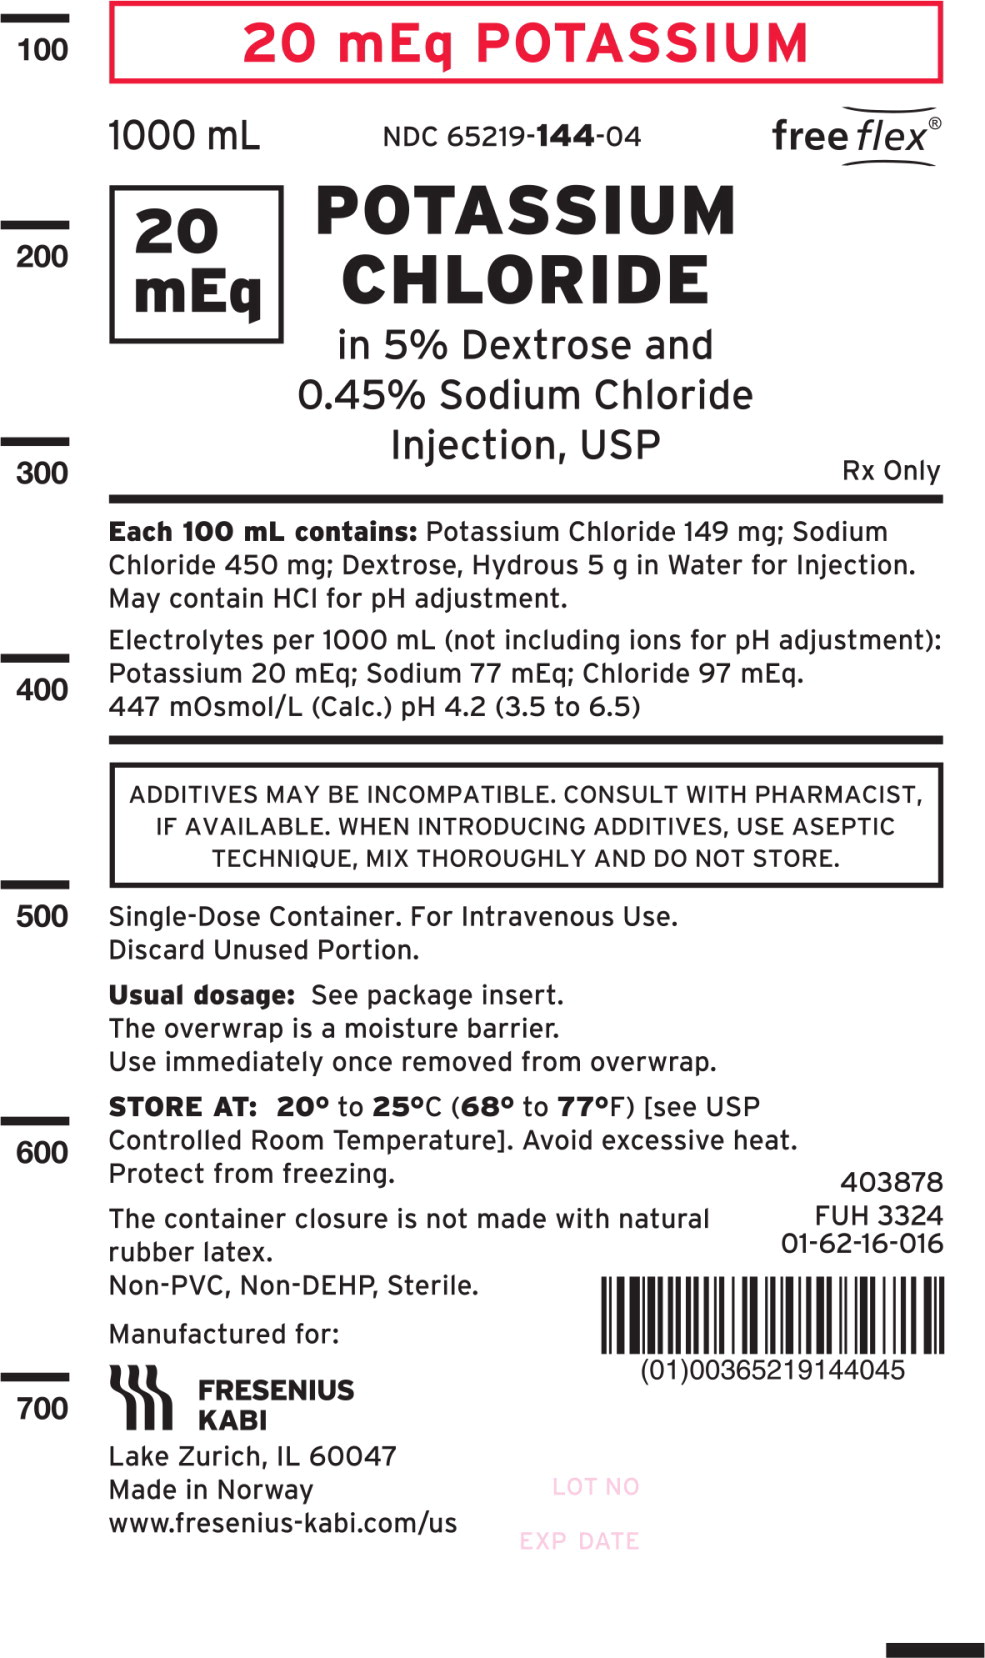 PACKAGE LABEL - PRINCIPAL DISPLAY – 20 mEq POTASSIUM CHLORIDE in 5% Dextrose and 0.45% Sodium Chloride Injection, USP 1000 mL Bag Label
